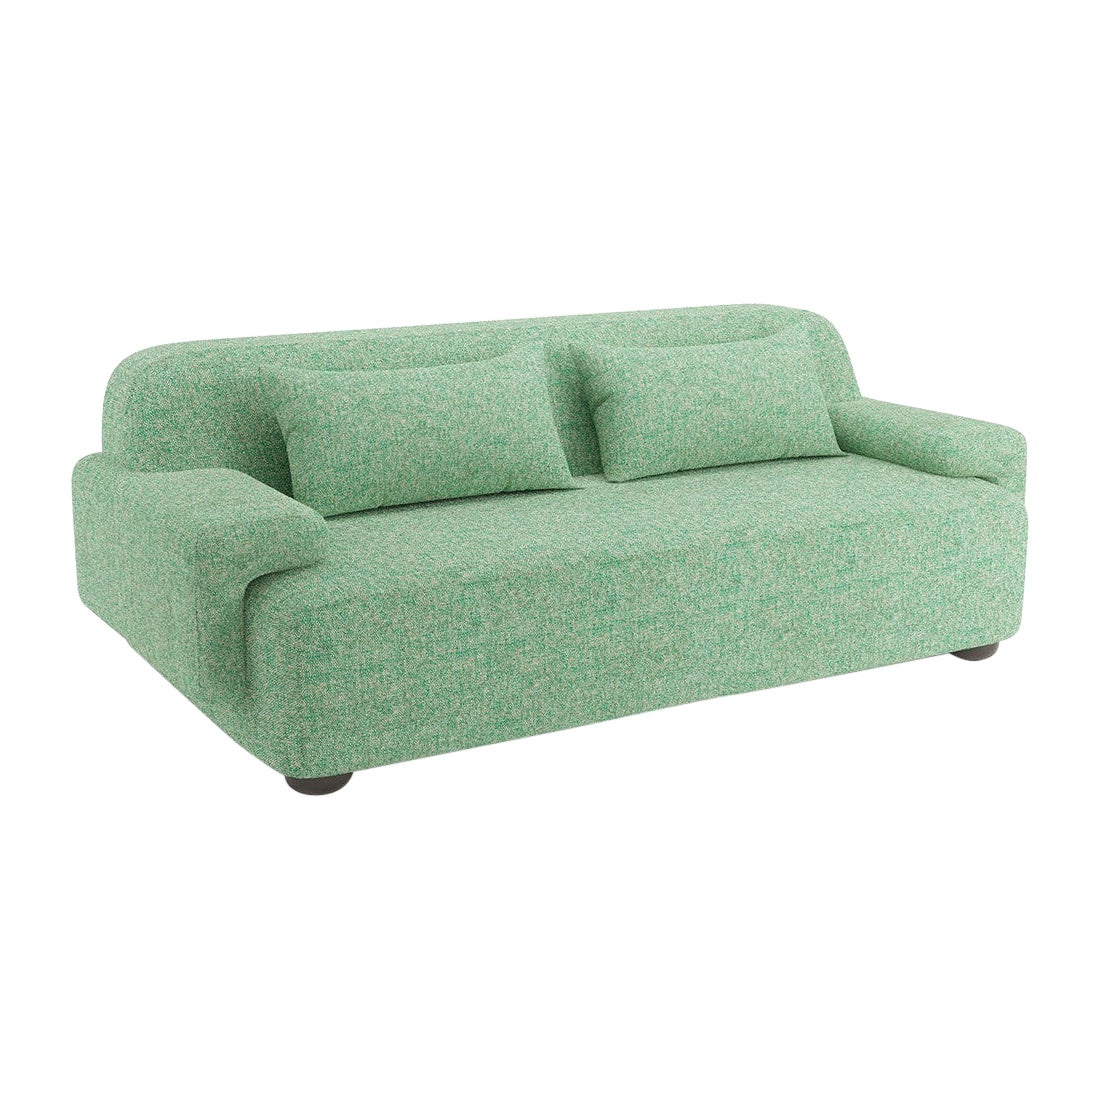 Popus Editions Lena 2.5 Seater Sofa in Emerald London Linen Fabric For Sale